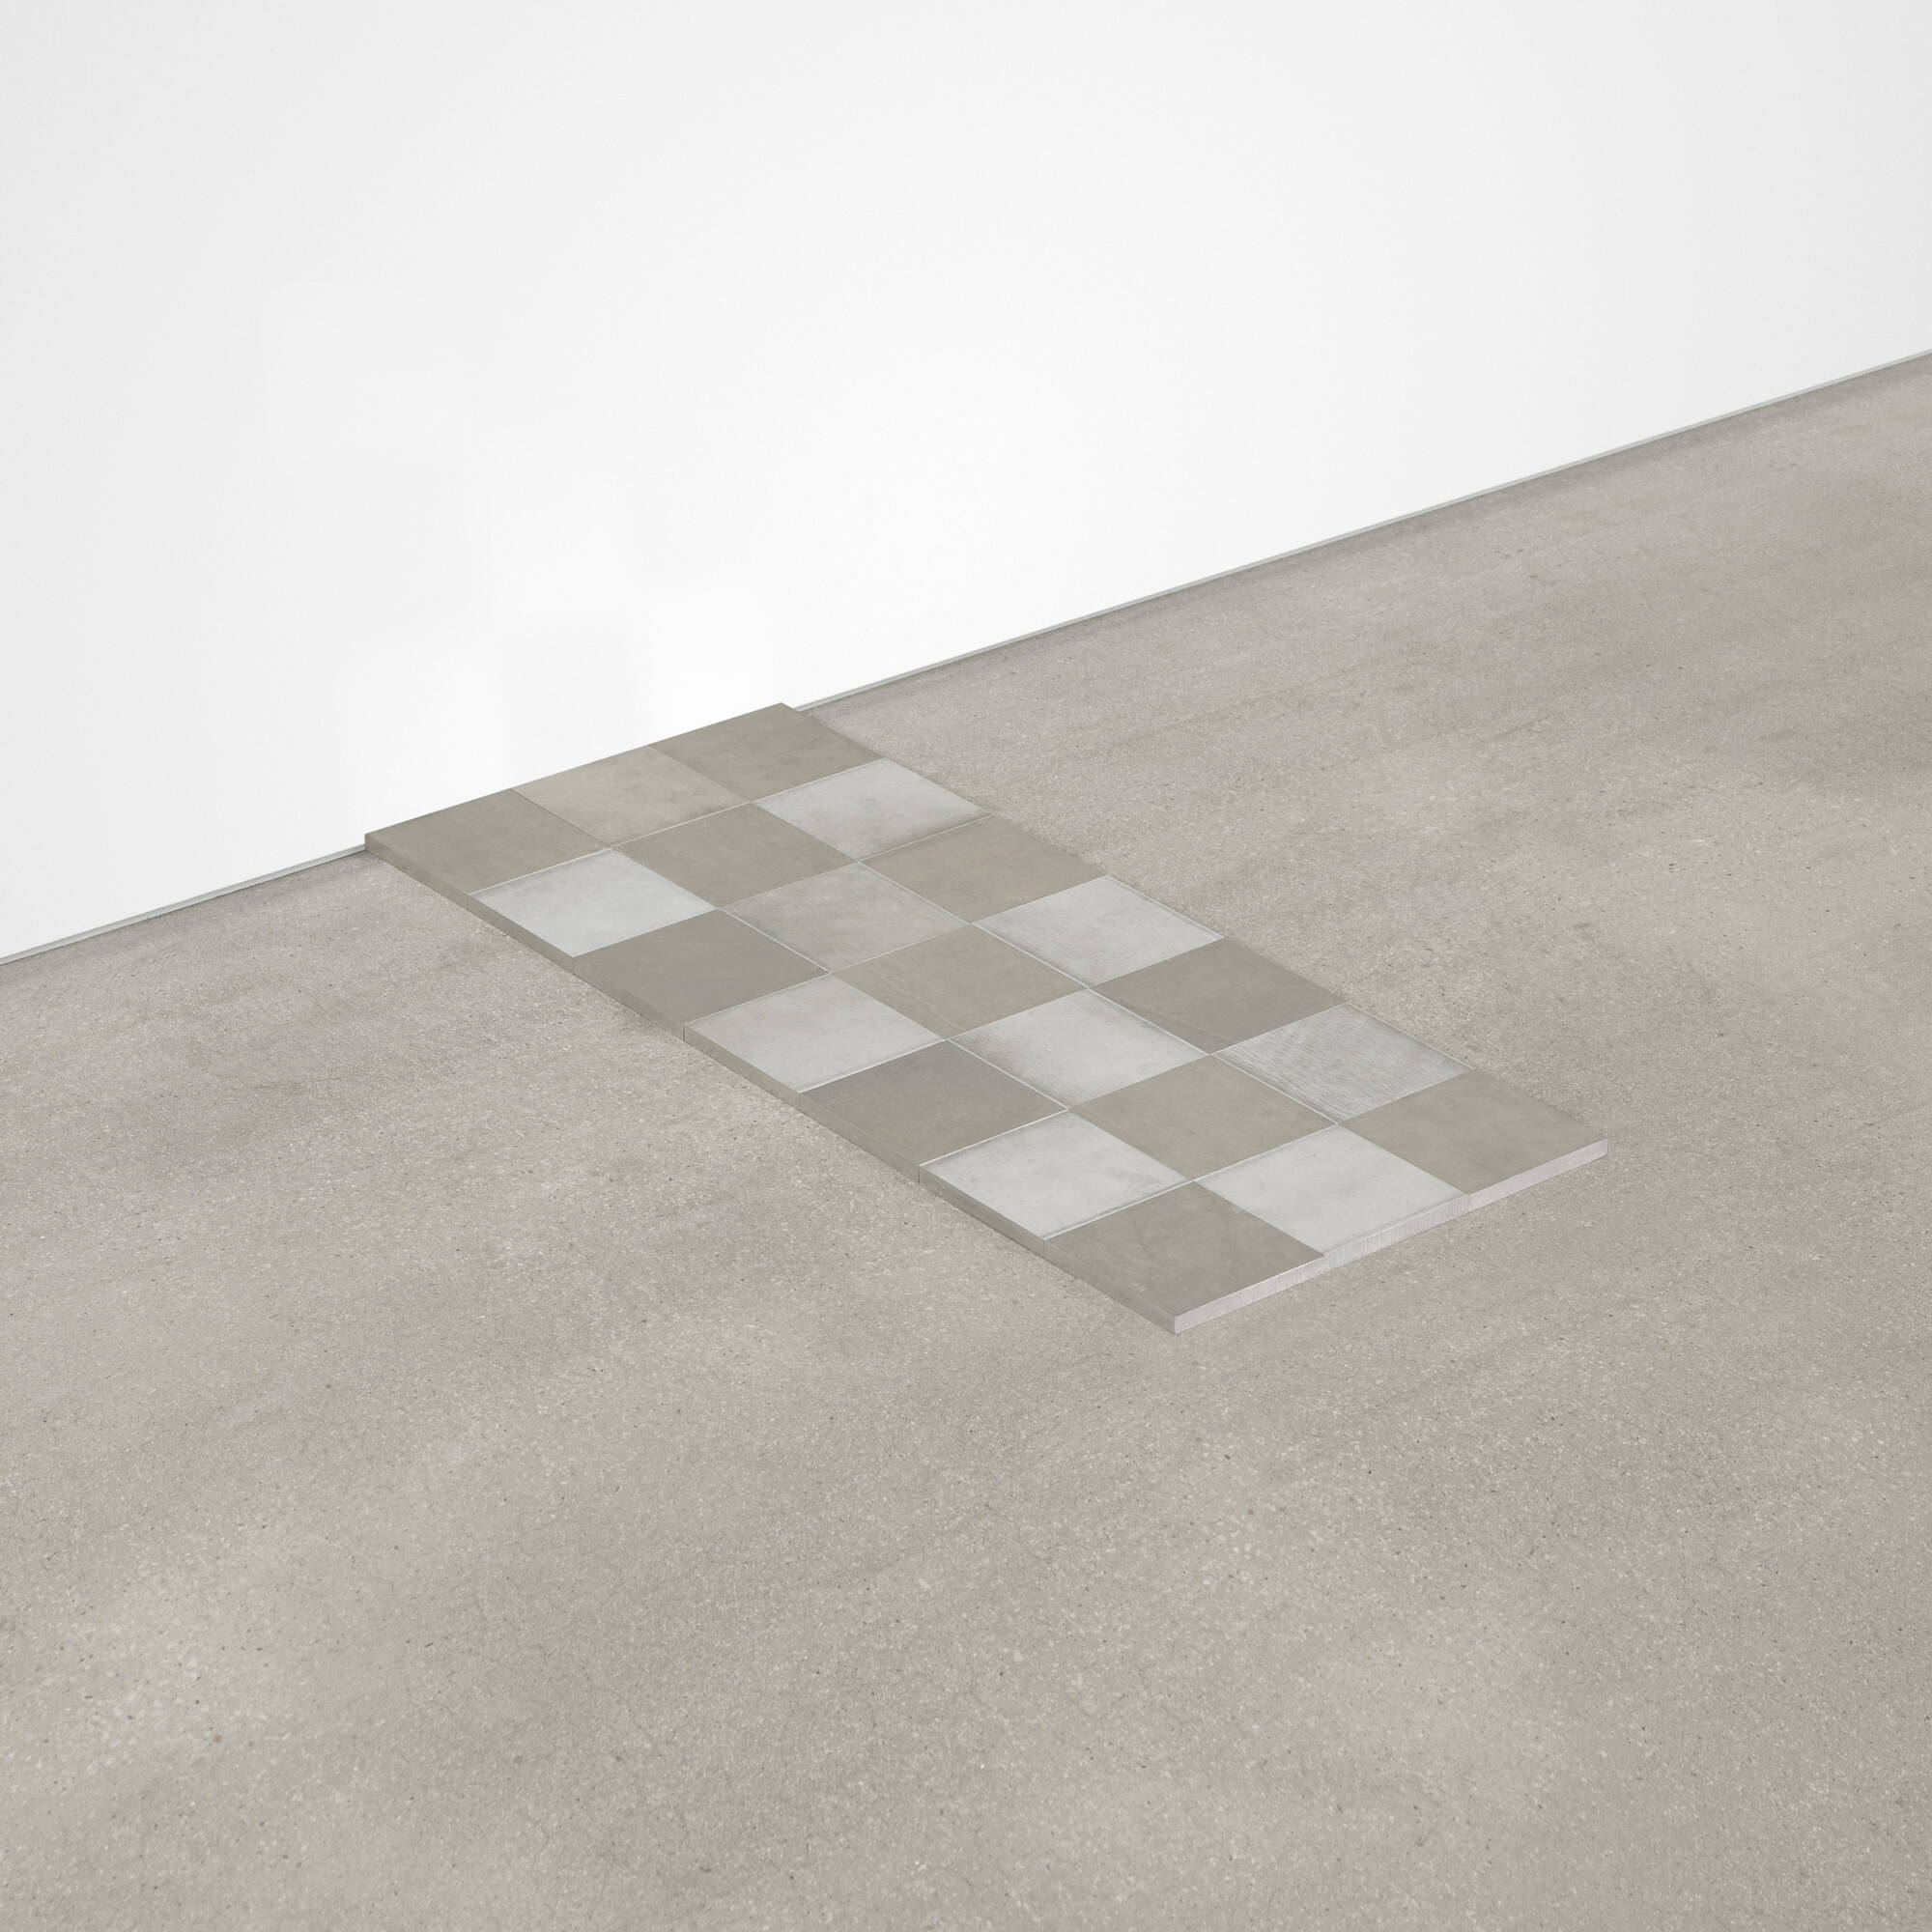 106: CARL ANDRE, Aluminum Σ 21 < Object Quality: Sculptural Works